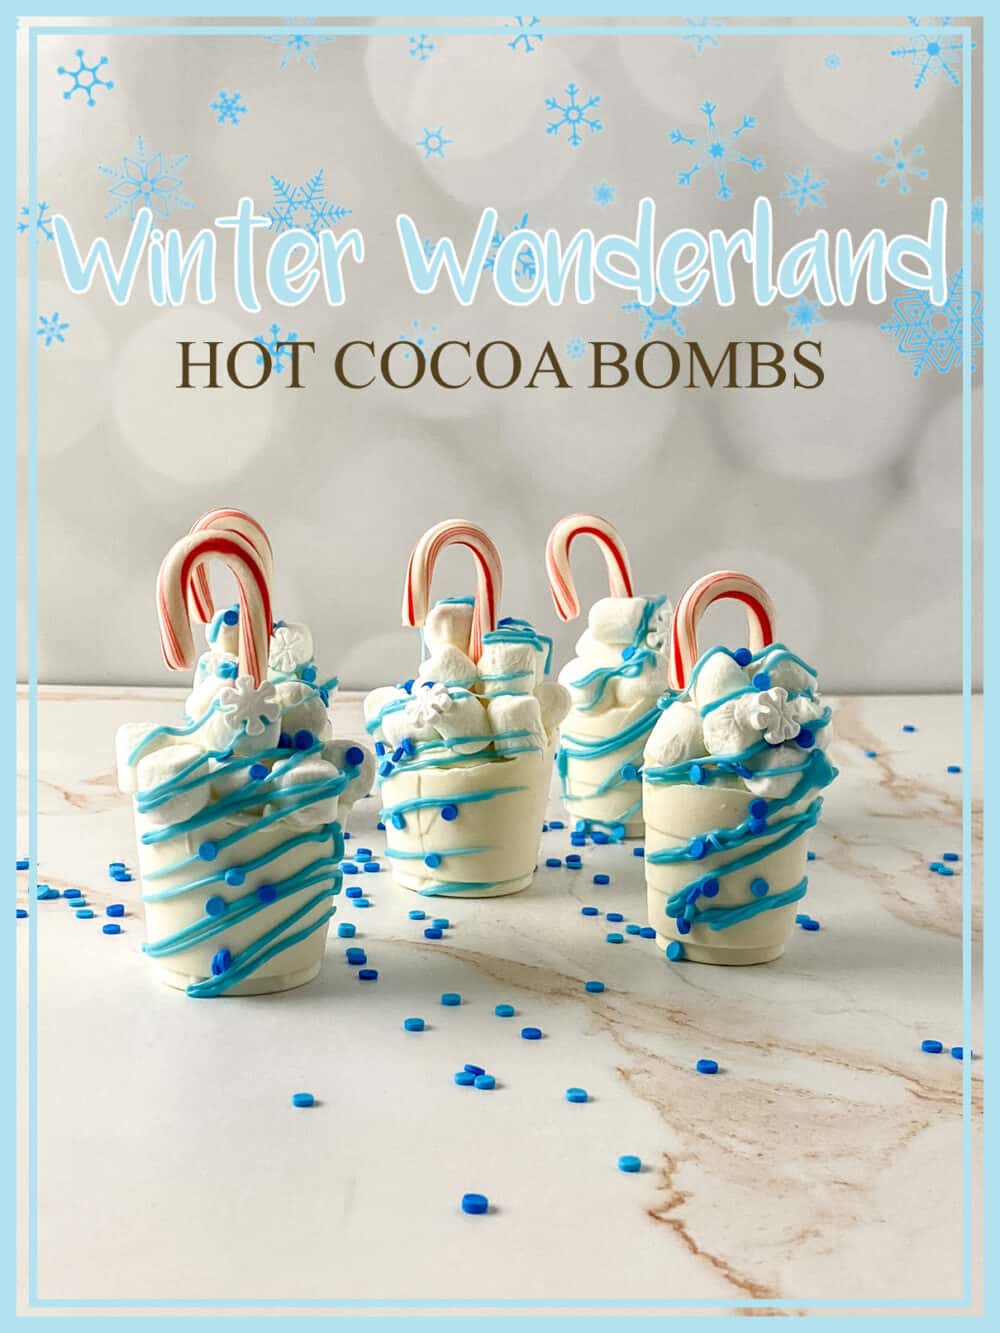 It’s a snowy scene out there, and these Winter Wonderland Hot Cocoa Bombs do just the trick! Warm up to these sweet creations, and cozy up to a delicious cup of hot chocolate!